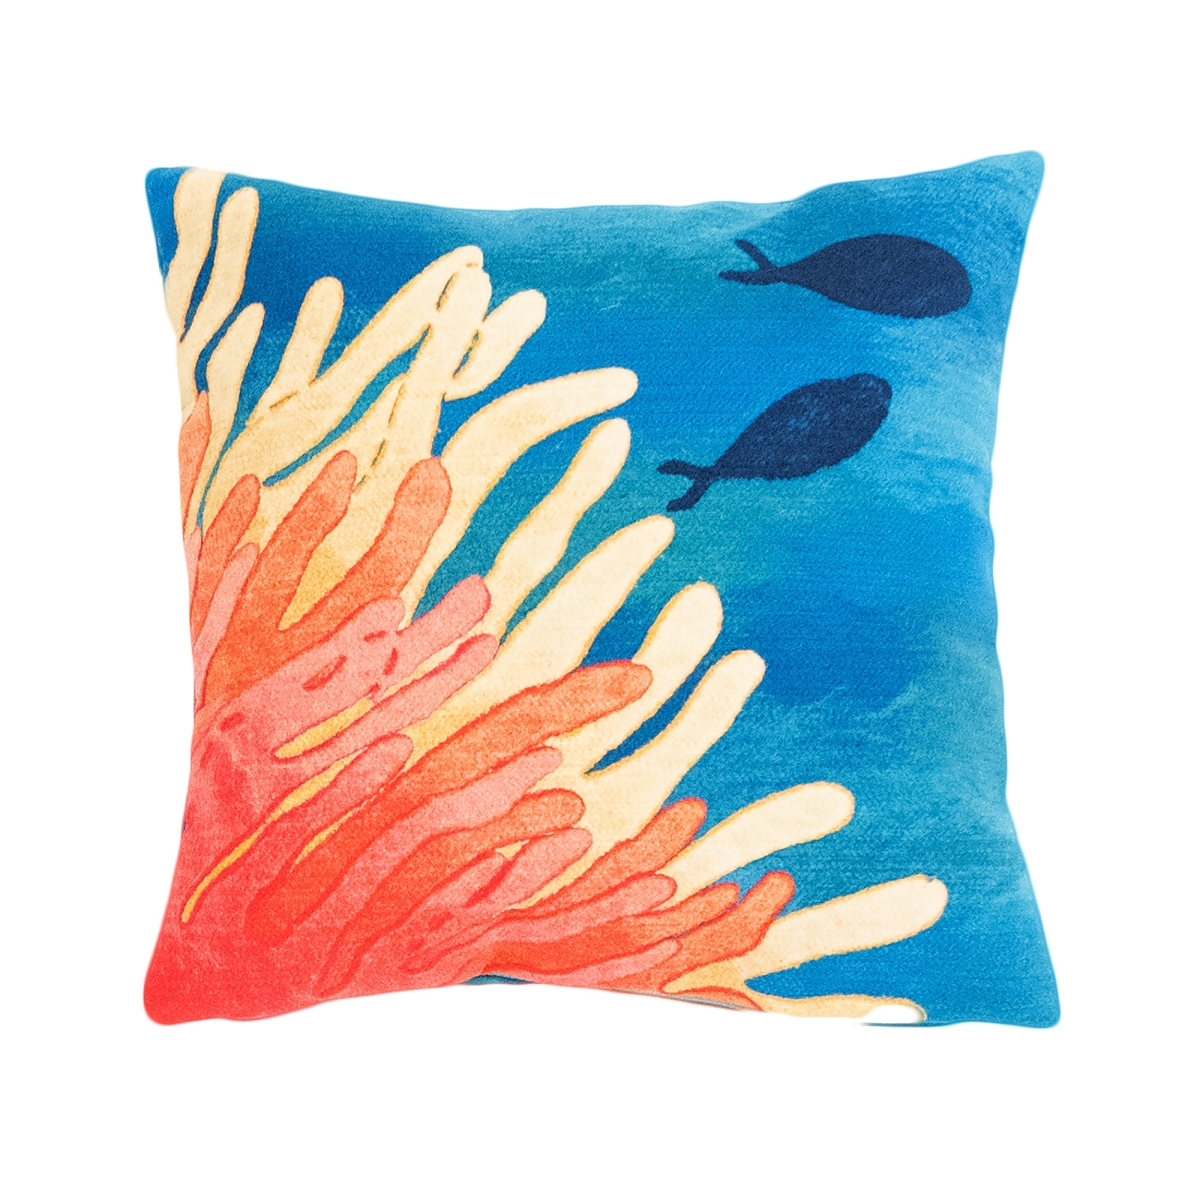 Trans-ocean Imports 7sc2s421117 20 In. Square Liora Manne Visions Iii Reef & Fish Indoor & Outdoor Handmade Square Pillow - Coral